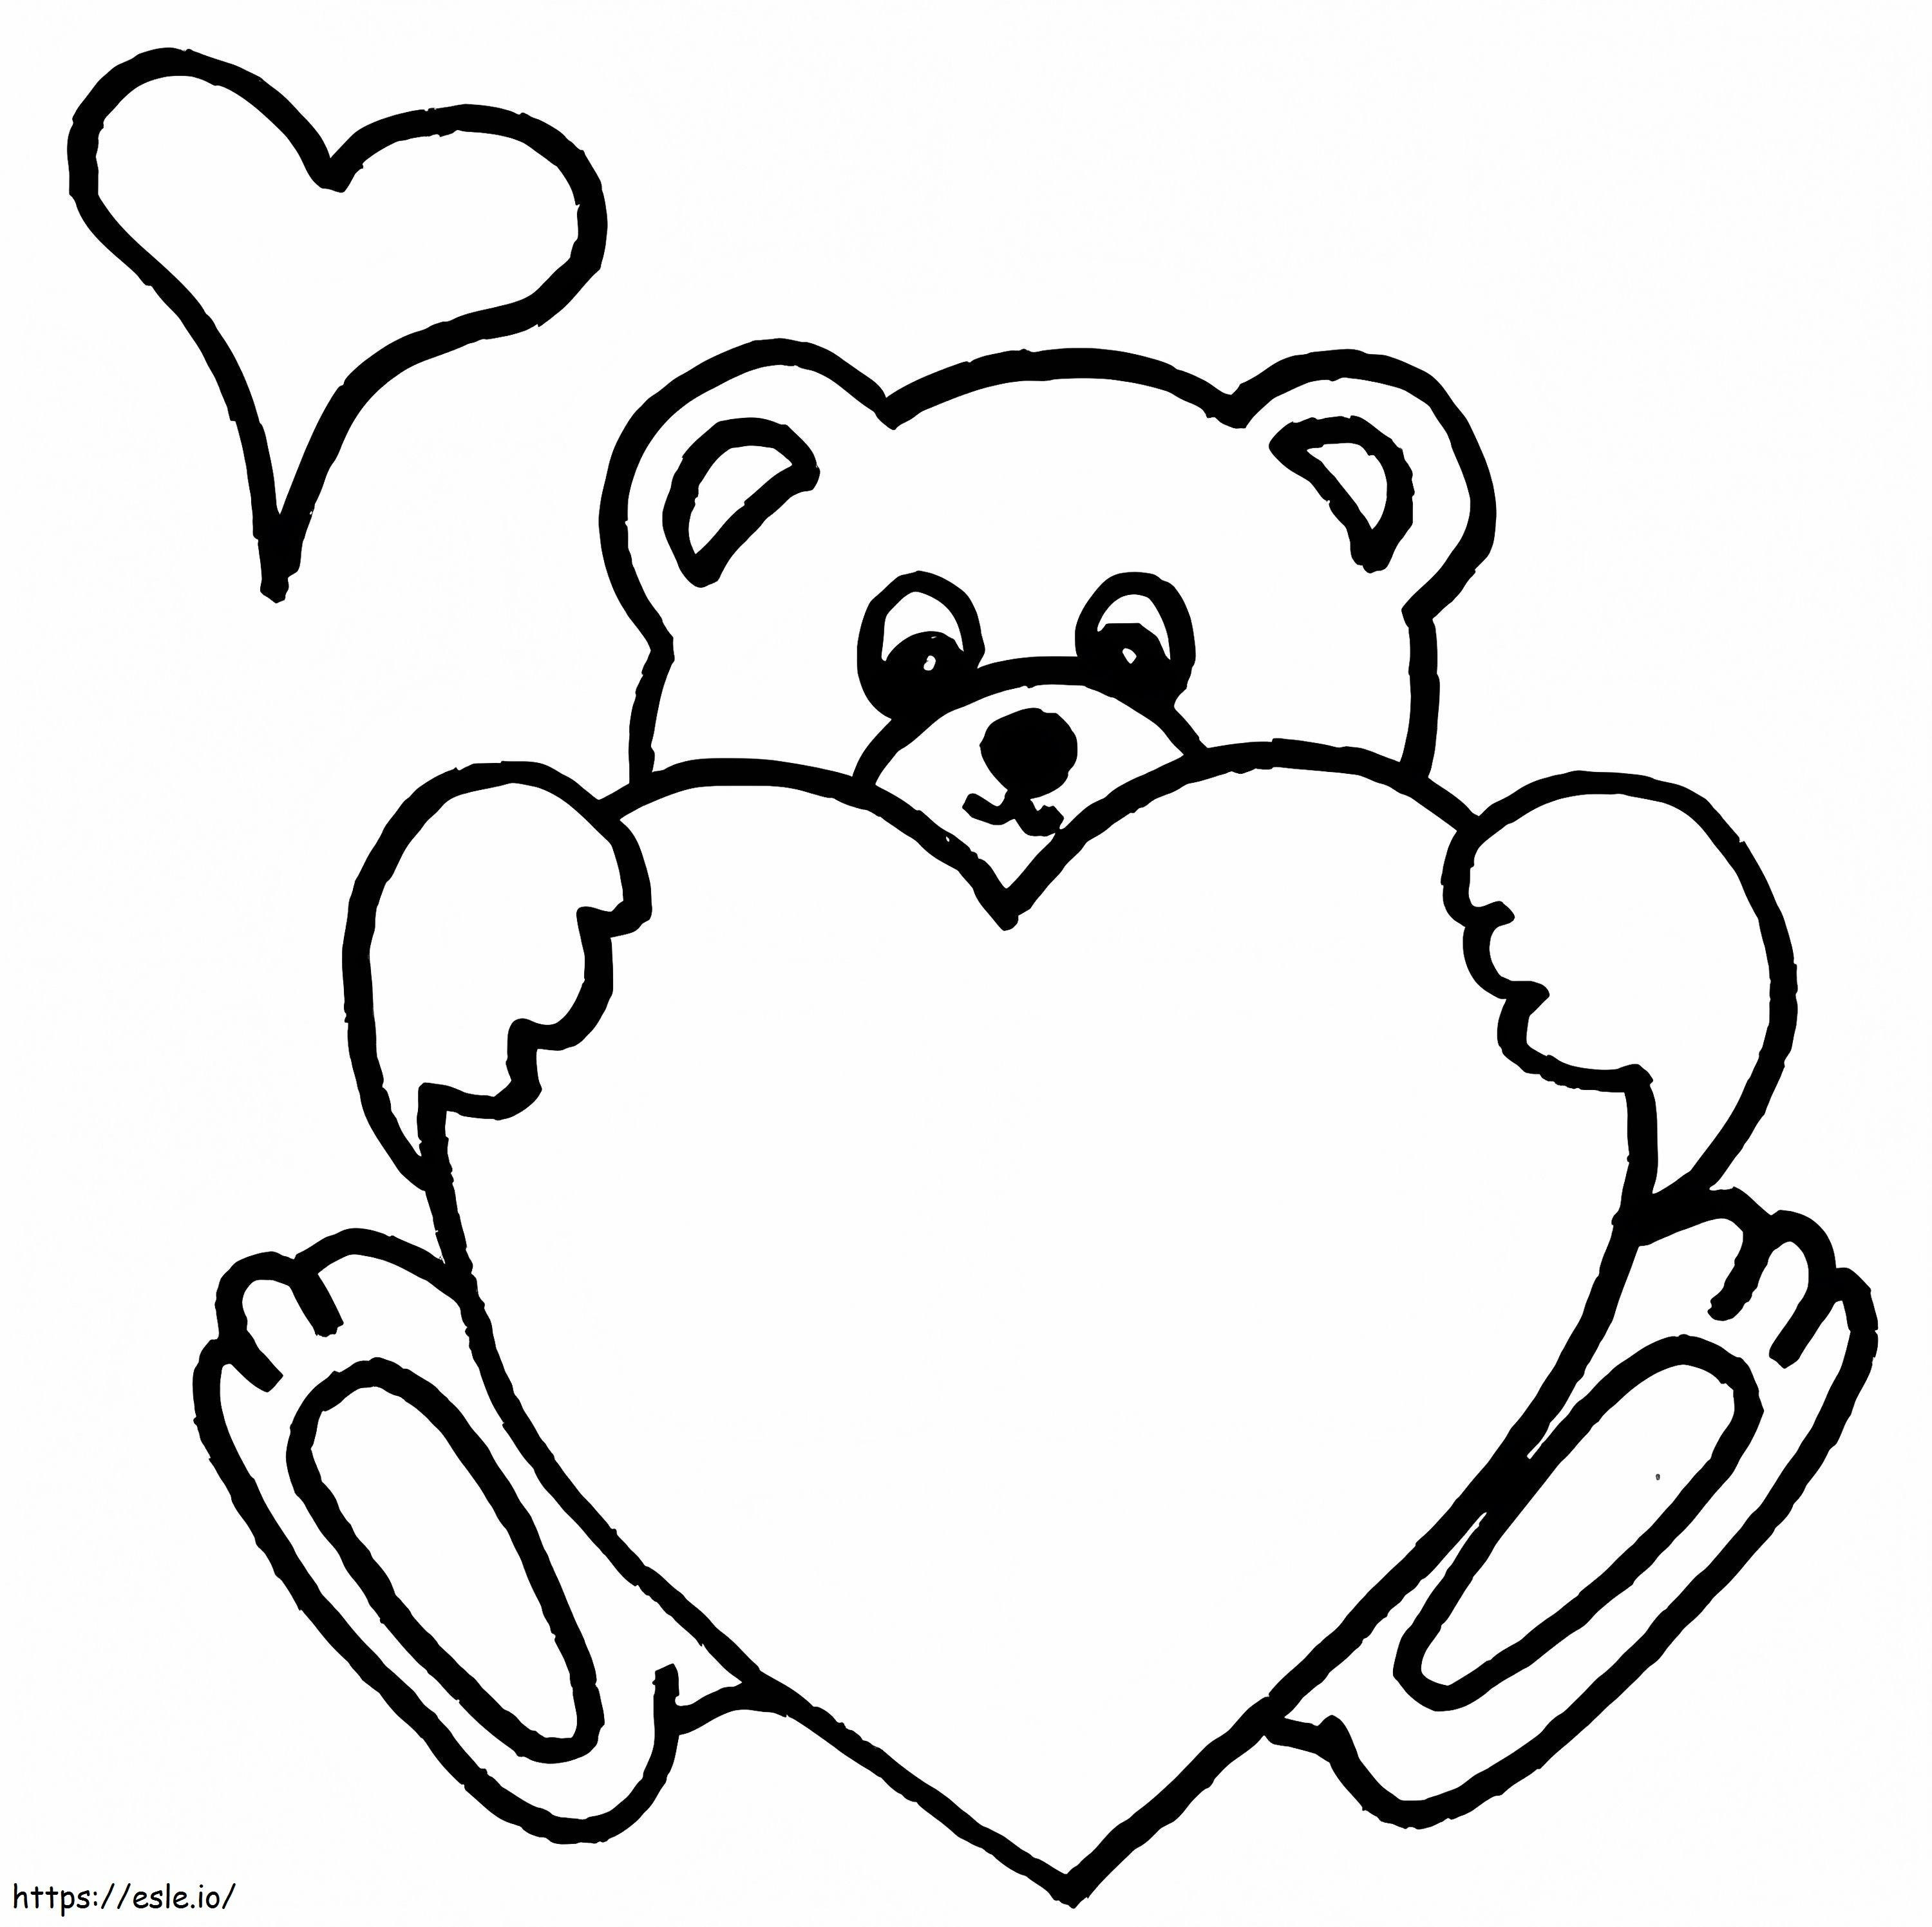 Love Teddy Bear coloring page